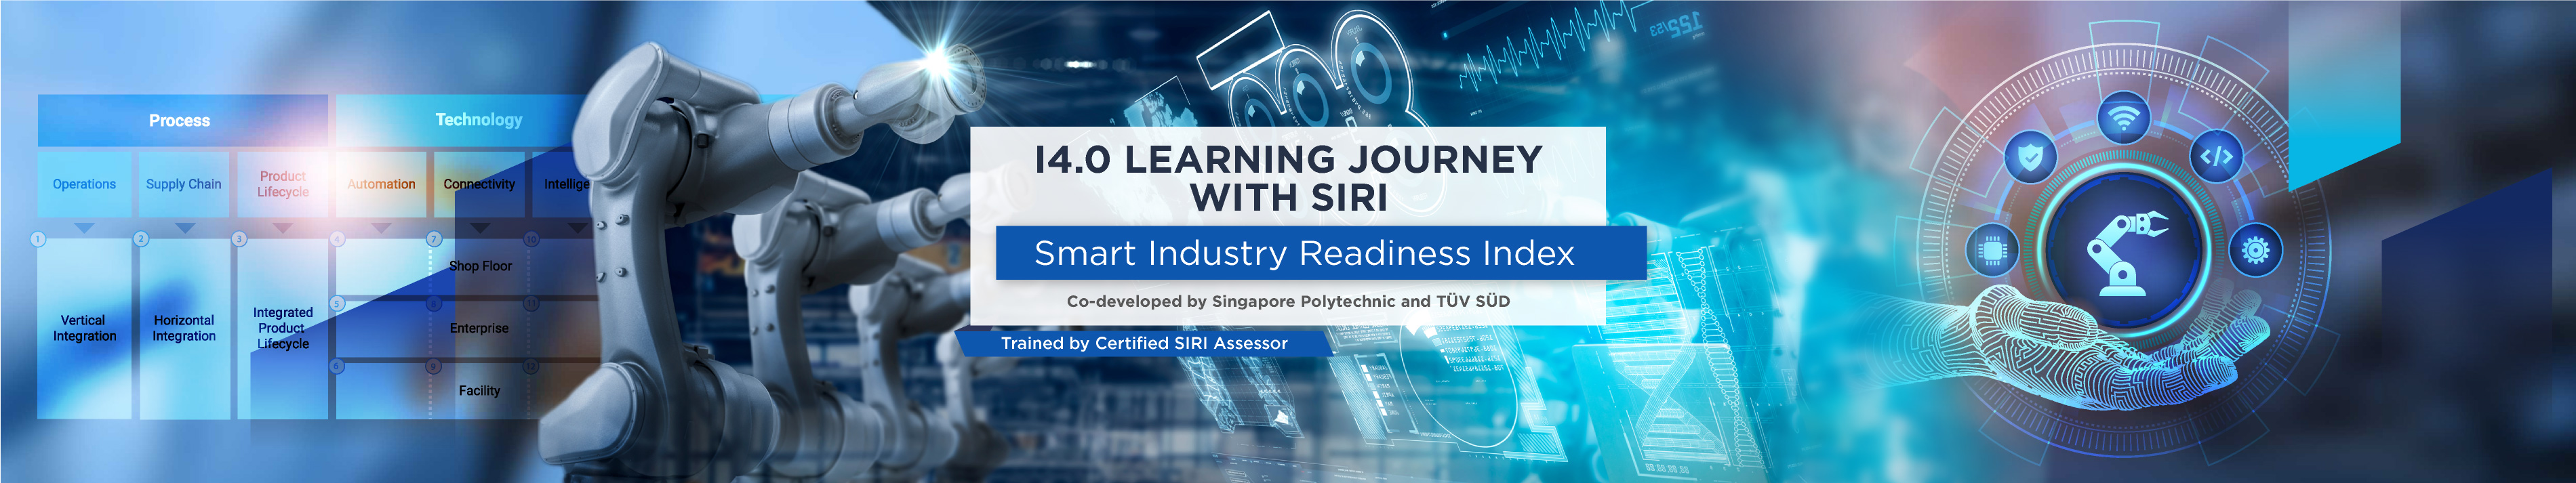 I40 Learning Journey with SIRI